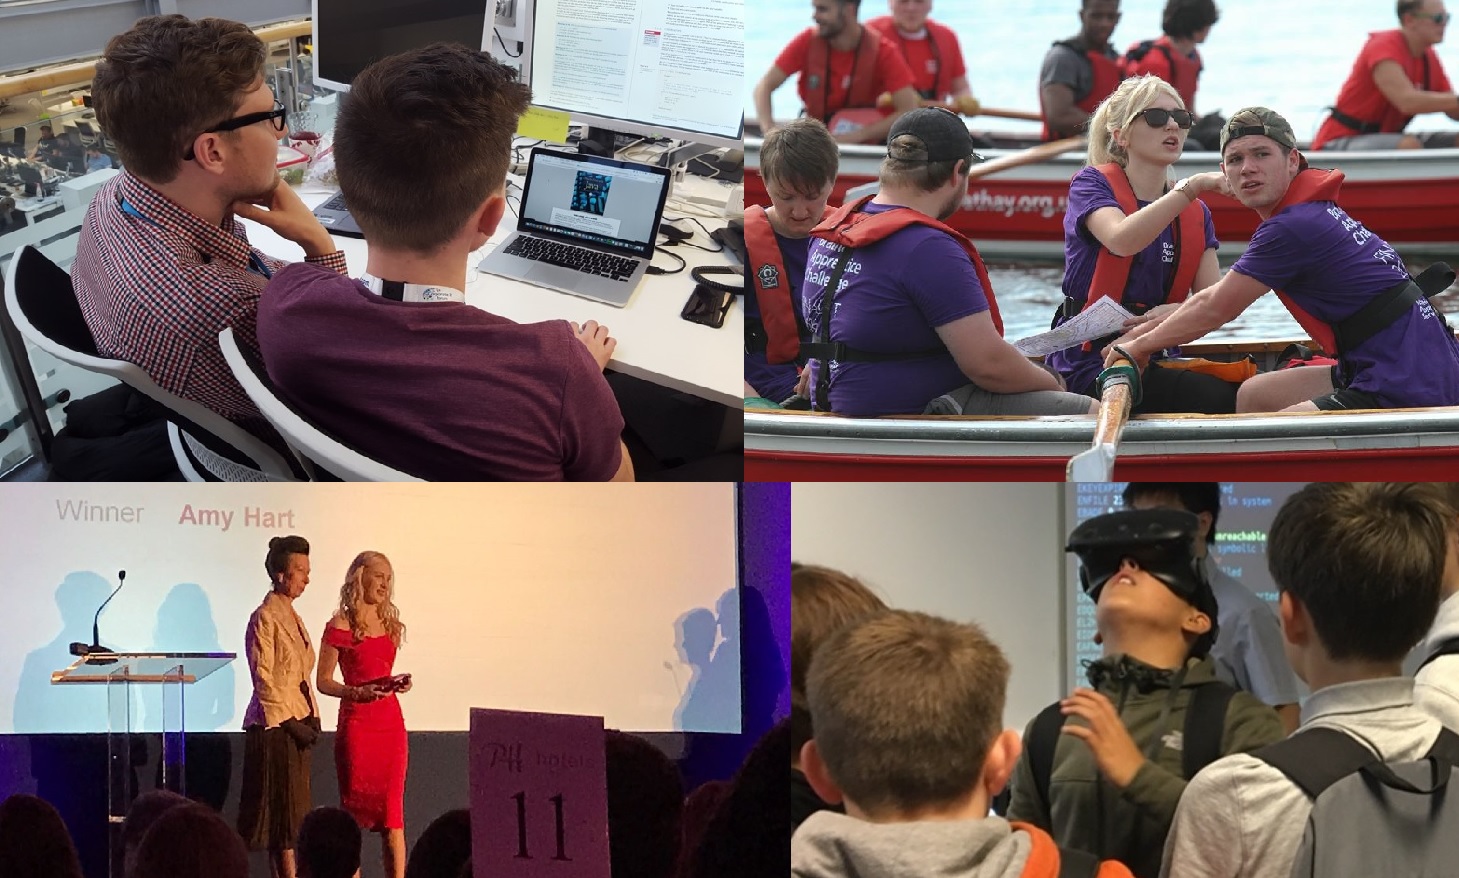 HMRC Digital Apprentices in 4 images. Two sit at a desk with a laptop and screen. A group of apprentices on a rowing boat. A female apprentice accepts an award from HRH Princess Anne. Students try out a virtual reality headset.